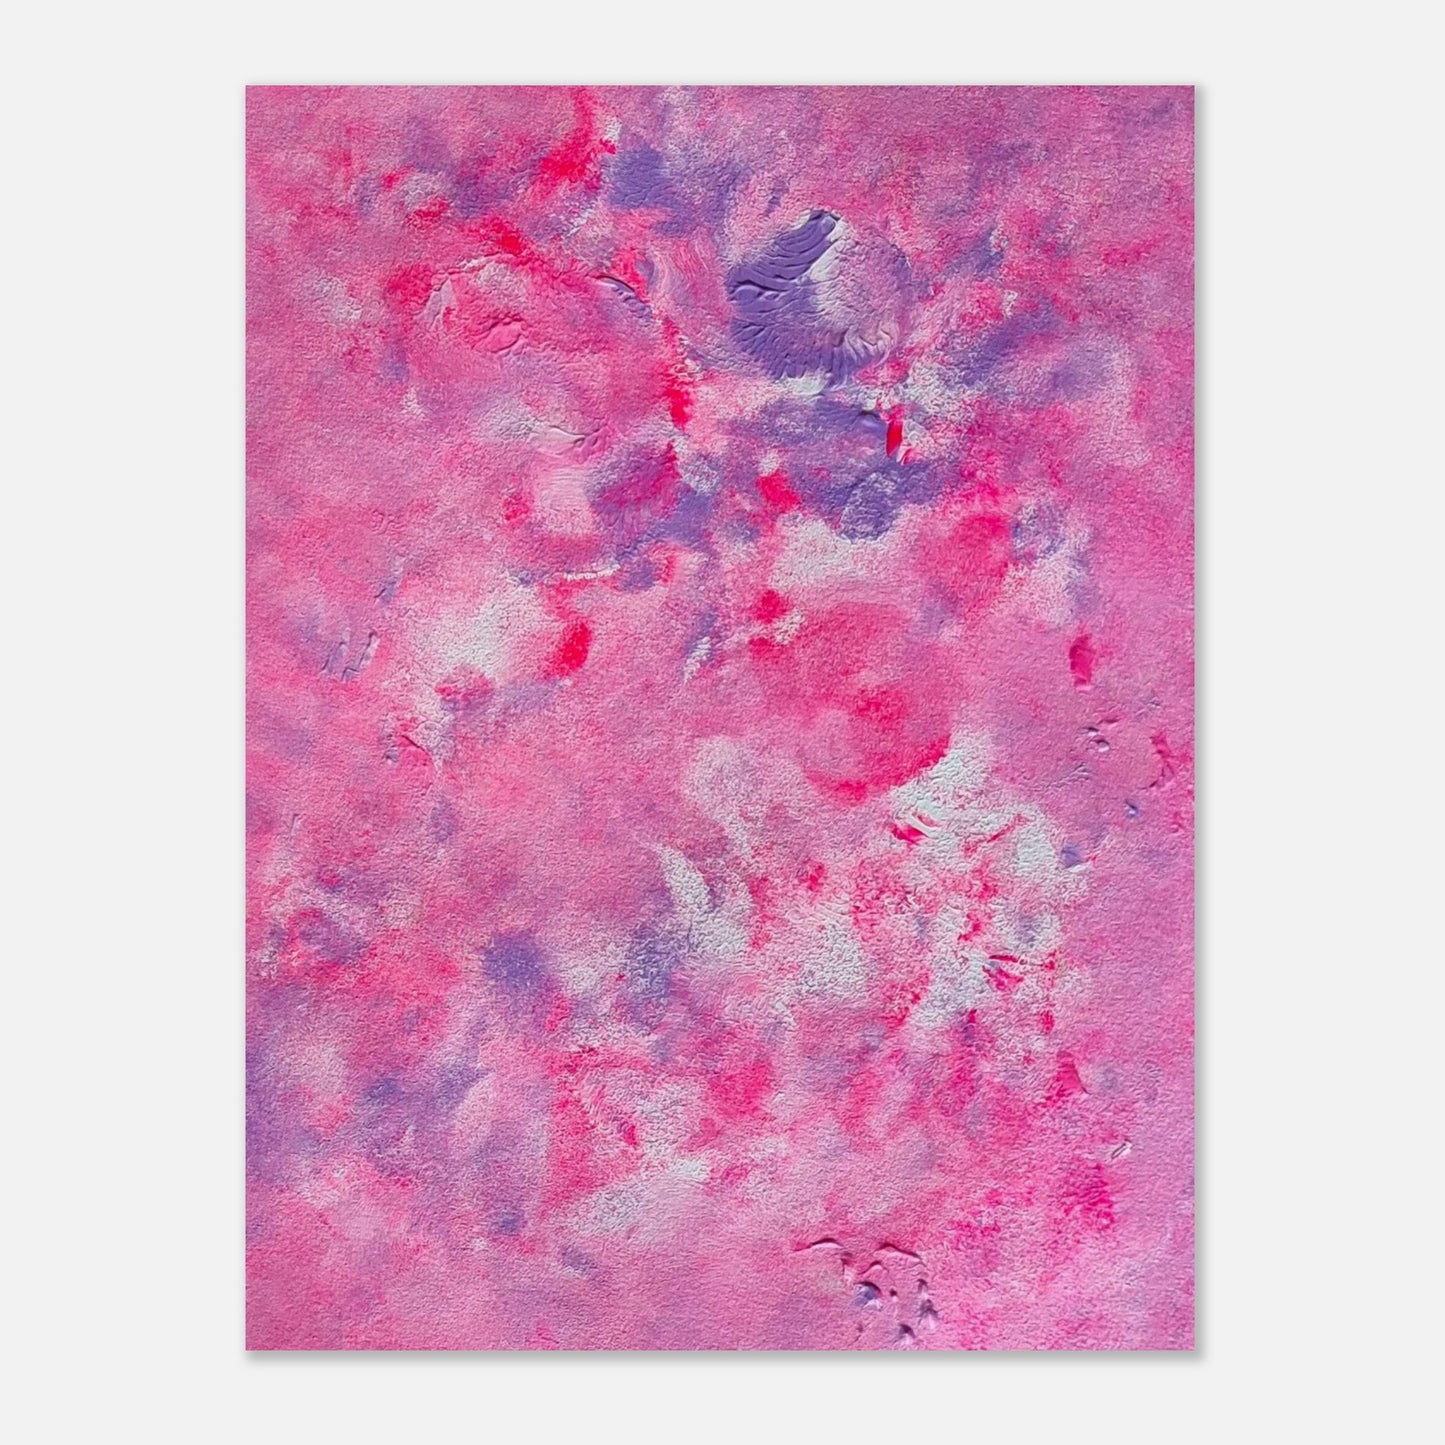 Pink, purple and white abstract art poster on a white background